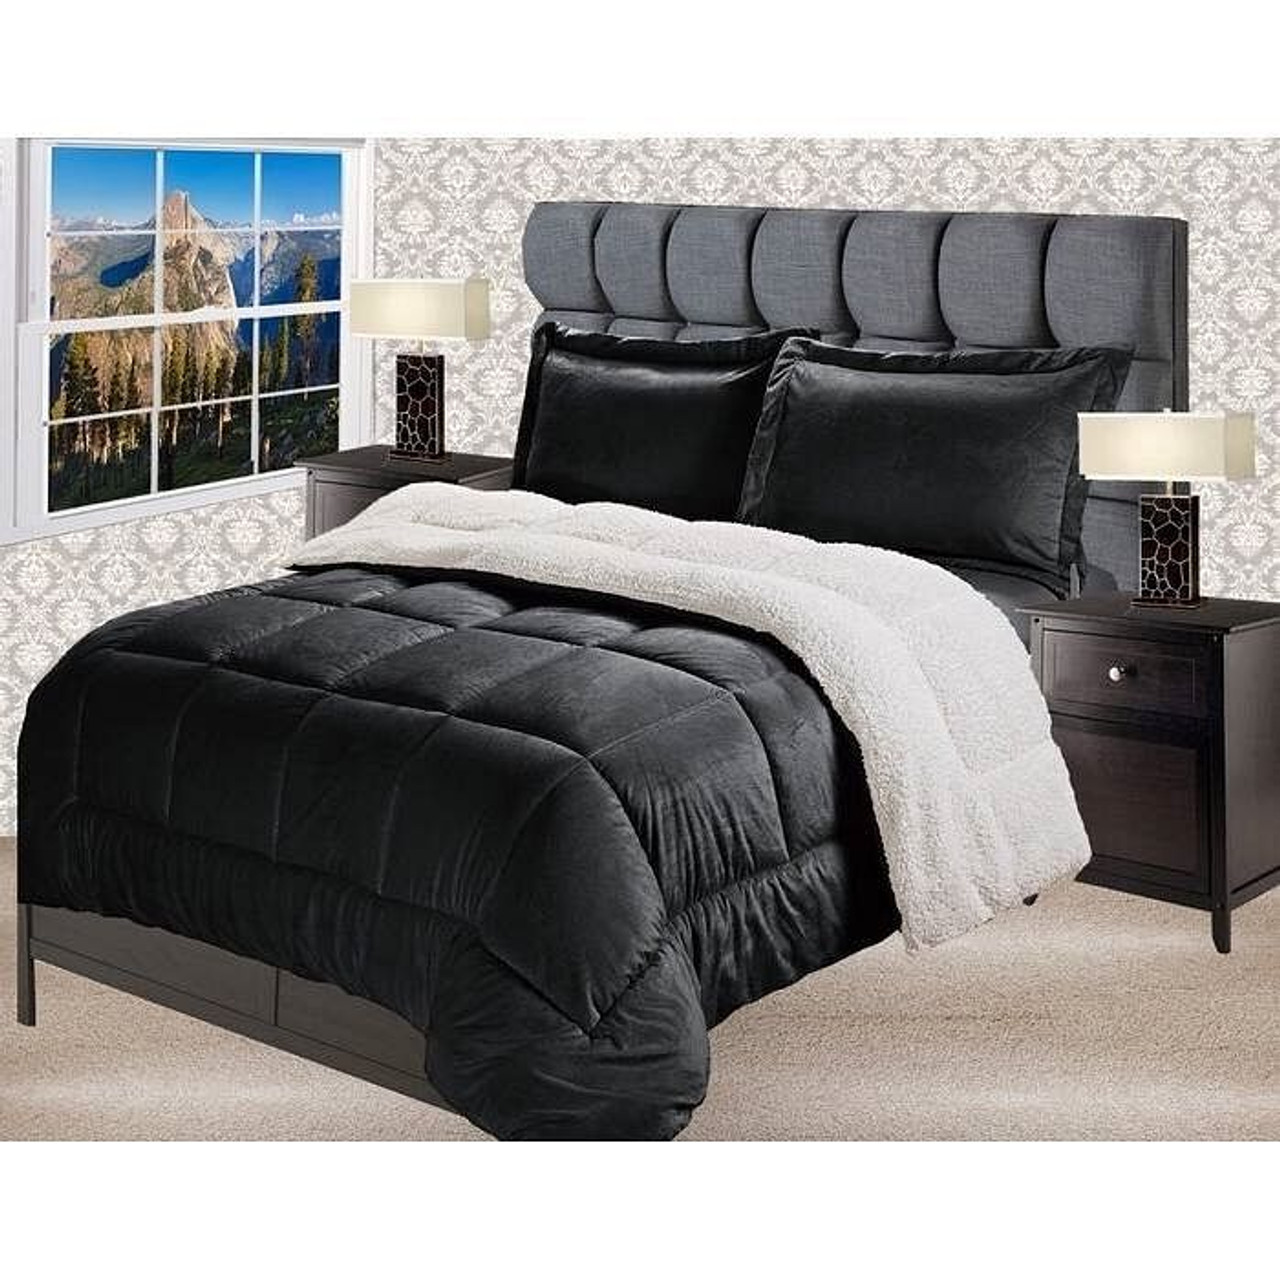 Queen Size 3 Piece Ultra Soft Sherpa Wrinkle Resistant Comforter Set in Black